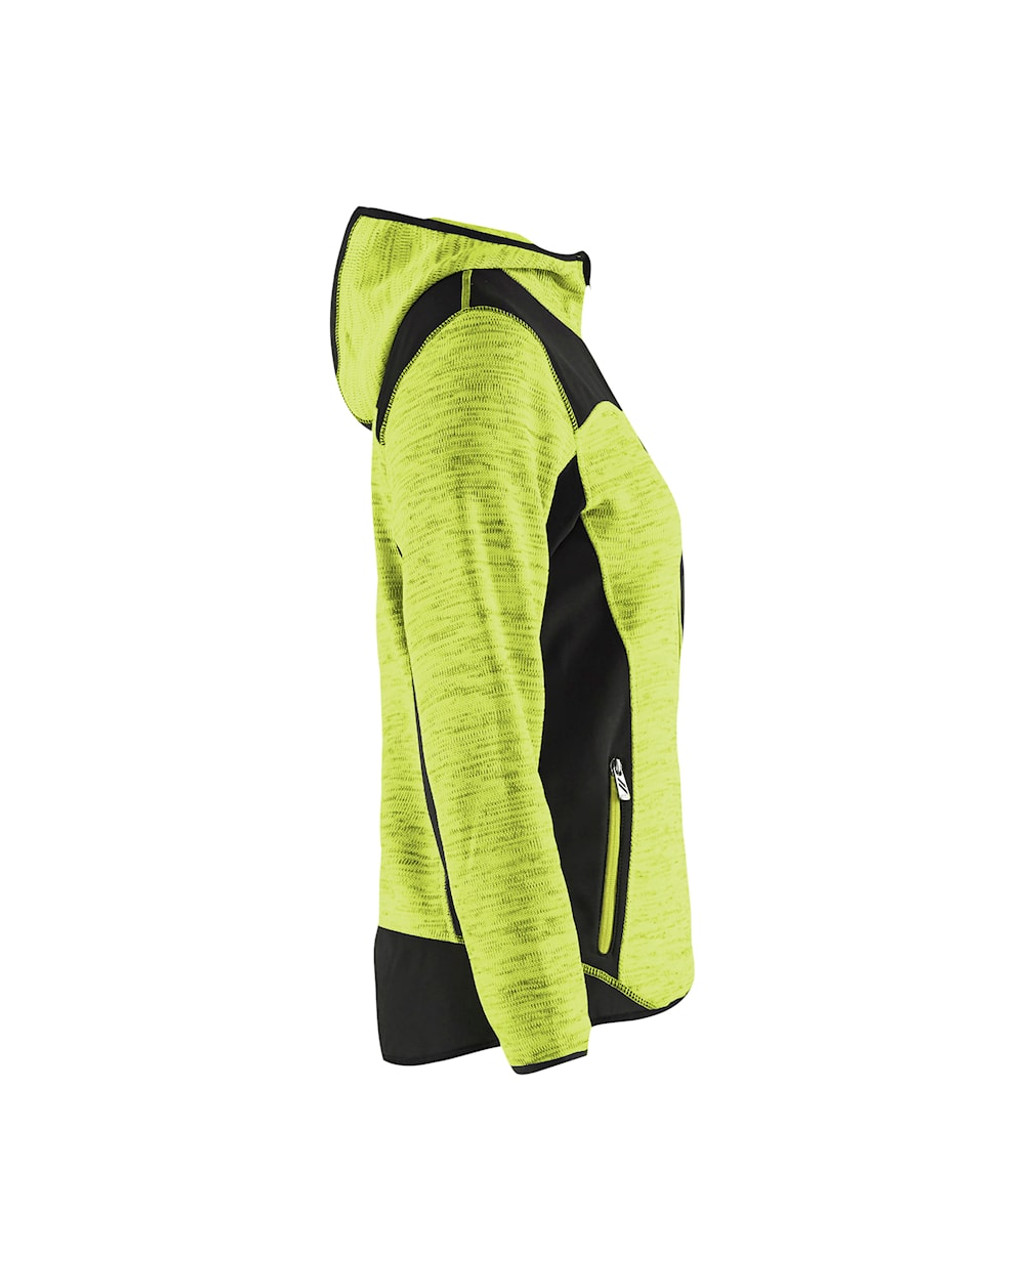 BLAKLADER Jacket | 4903 Womens High Vis Yellow Jacket with Full Zip Knitted in Polyester